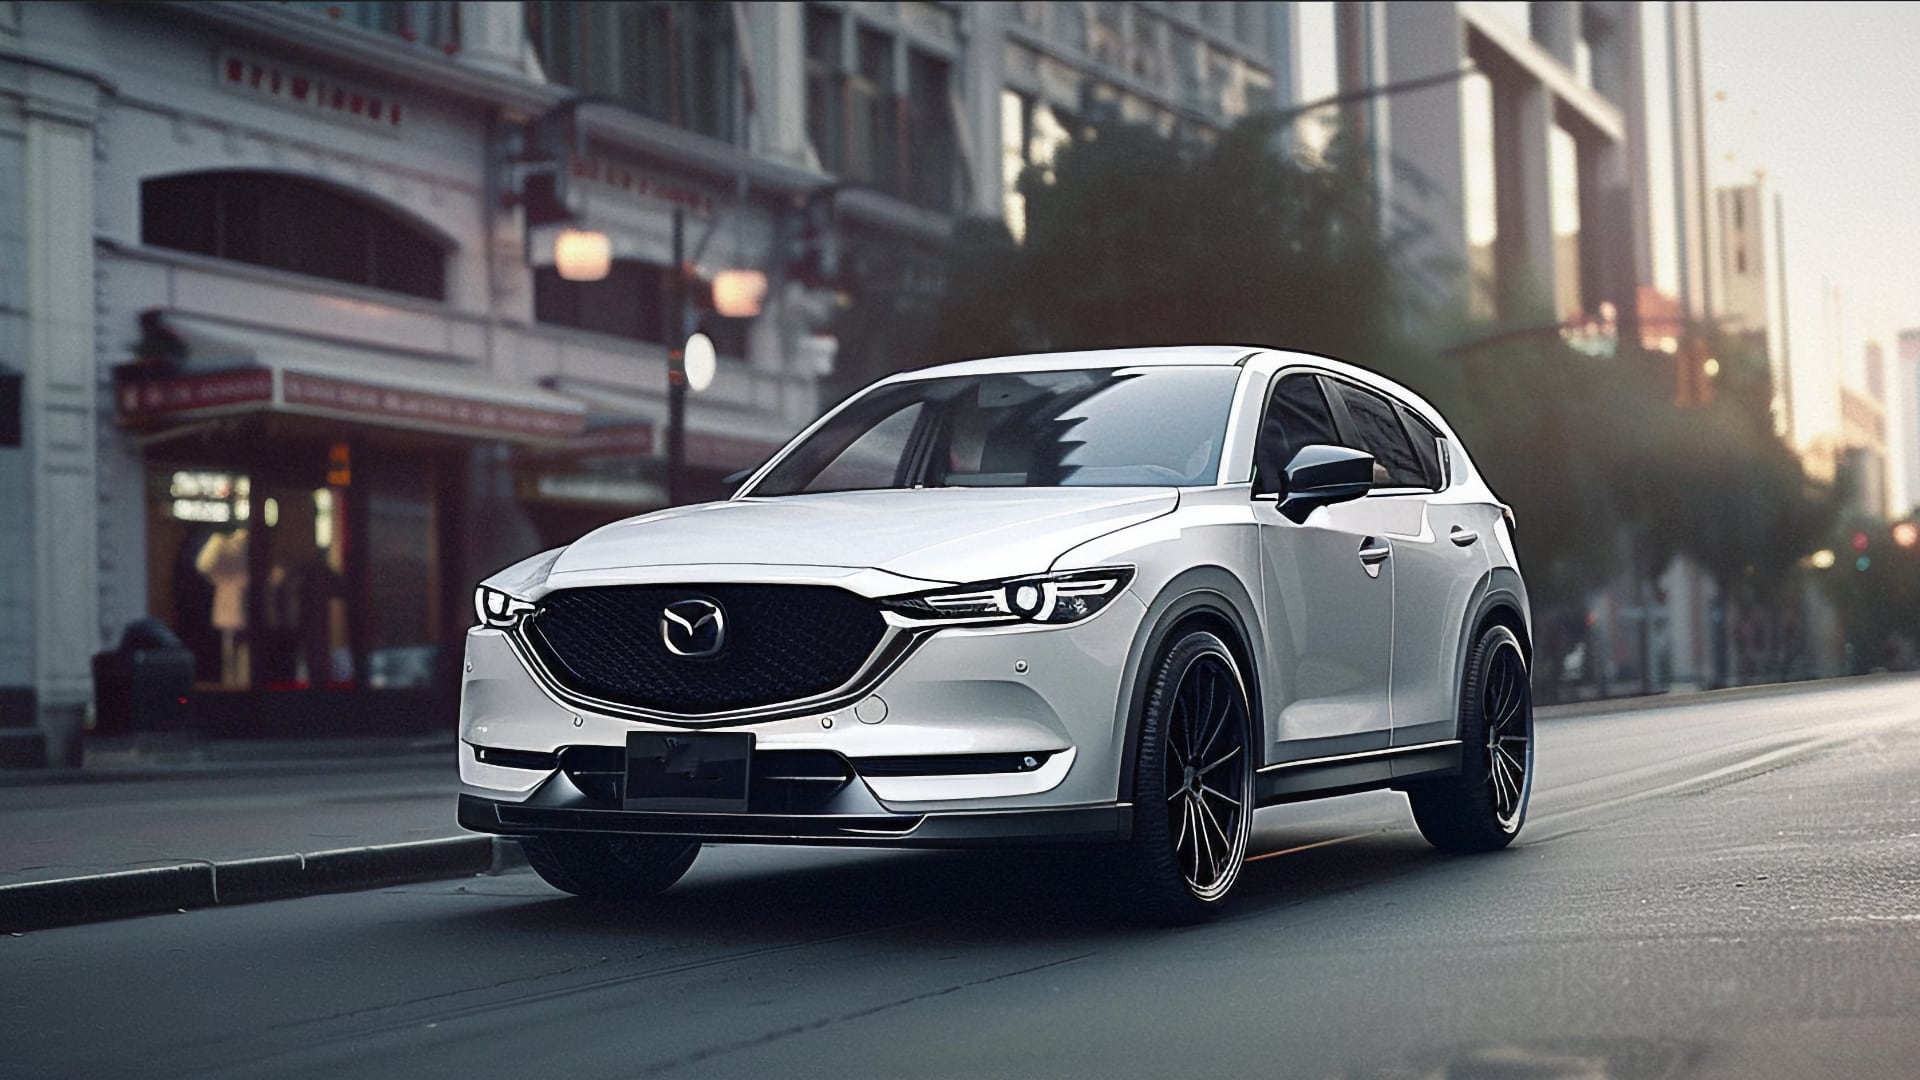 The Mazda CX-5, with years to avoid, is driving down a city street.